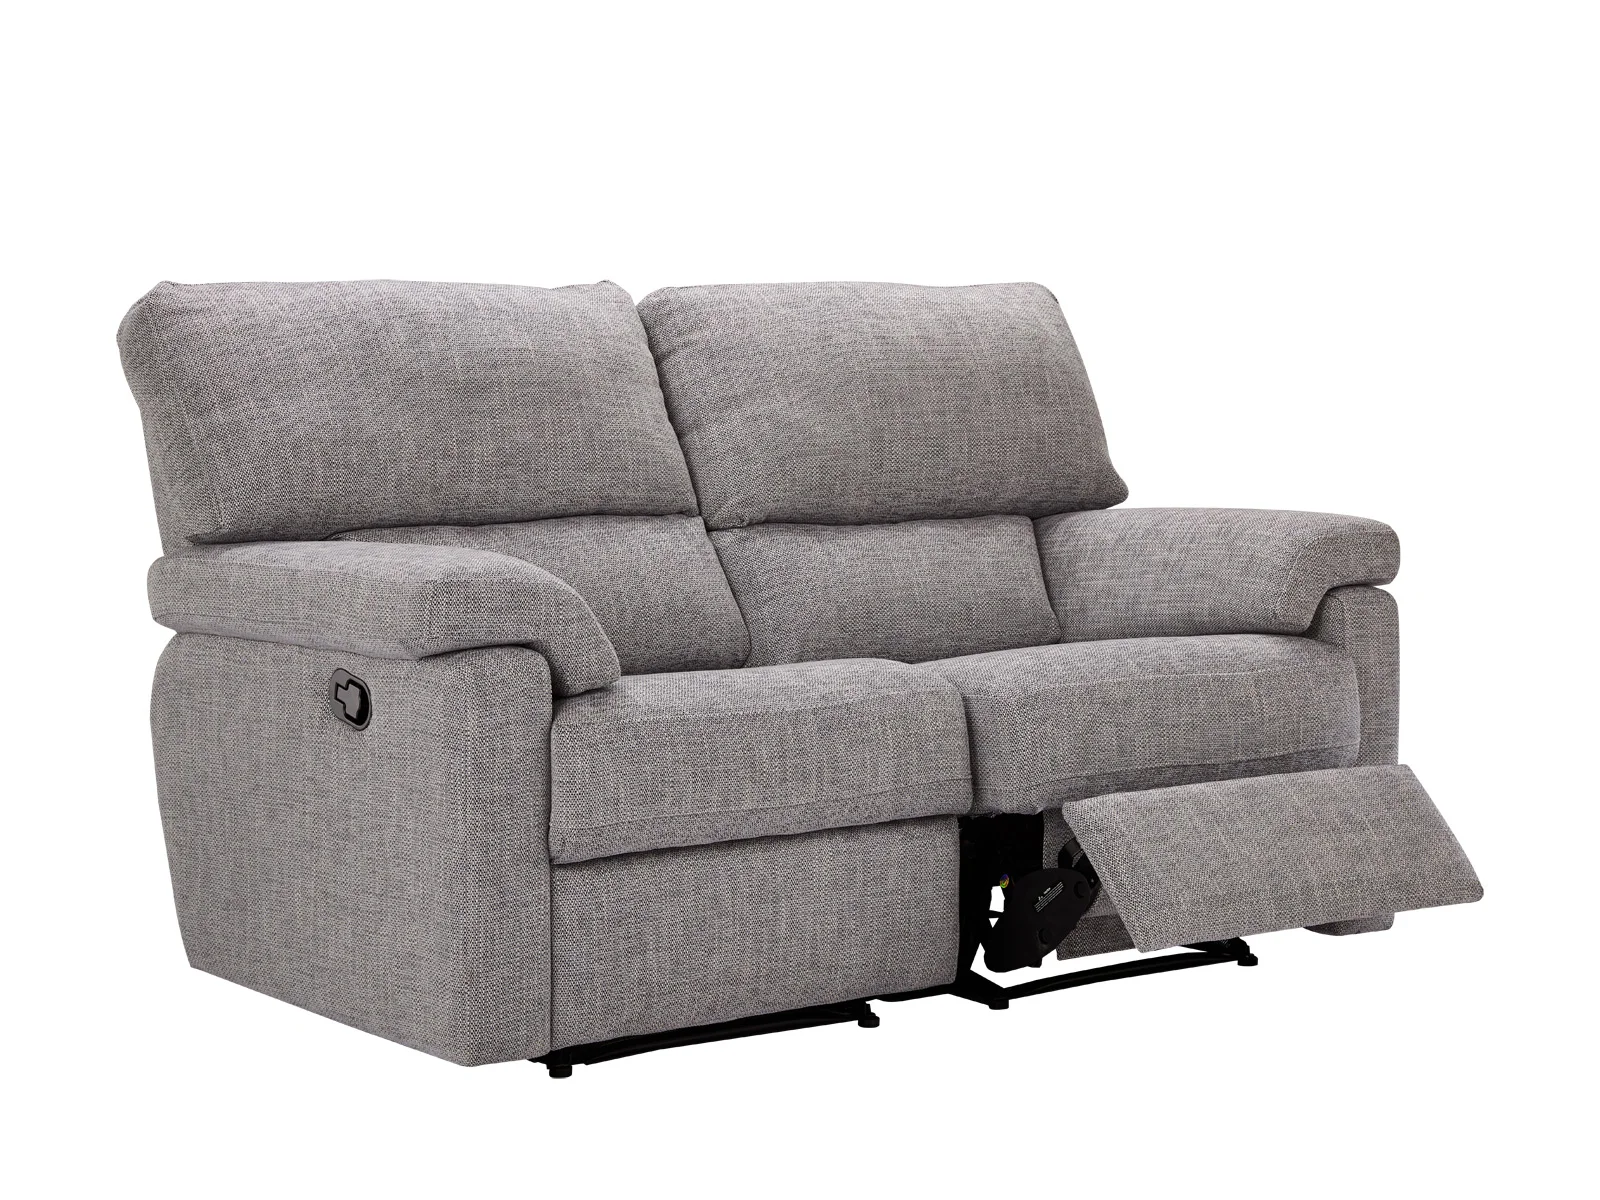 2 Seater Sofa Manual Double Recliner